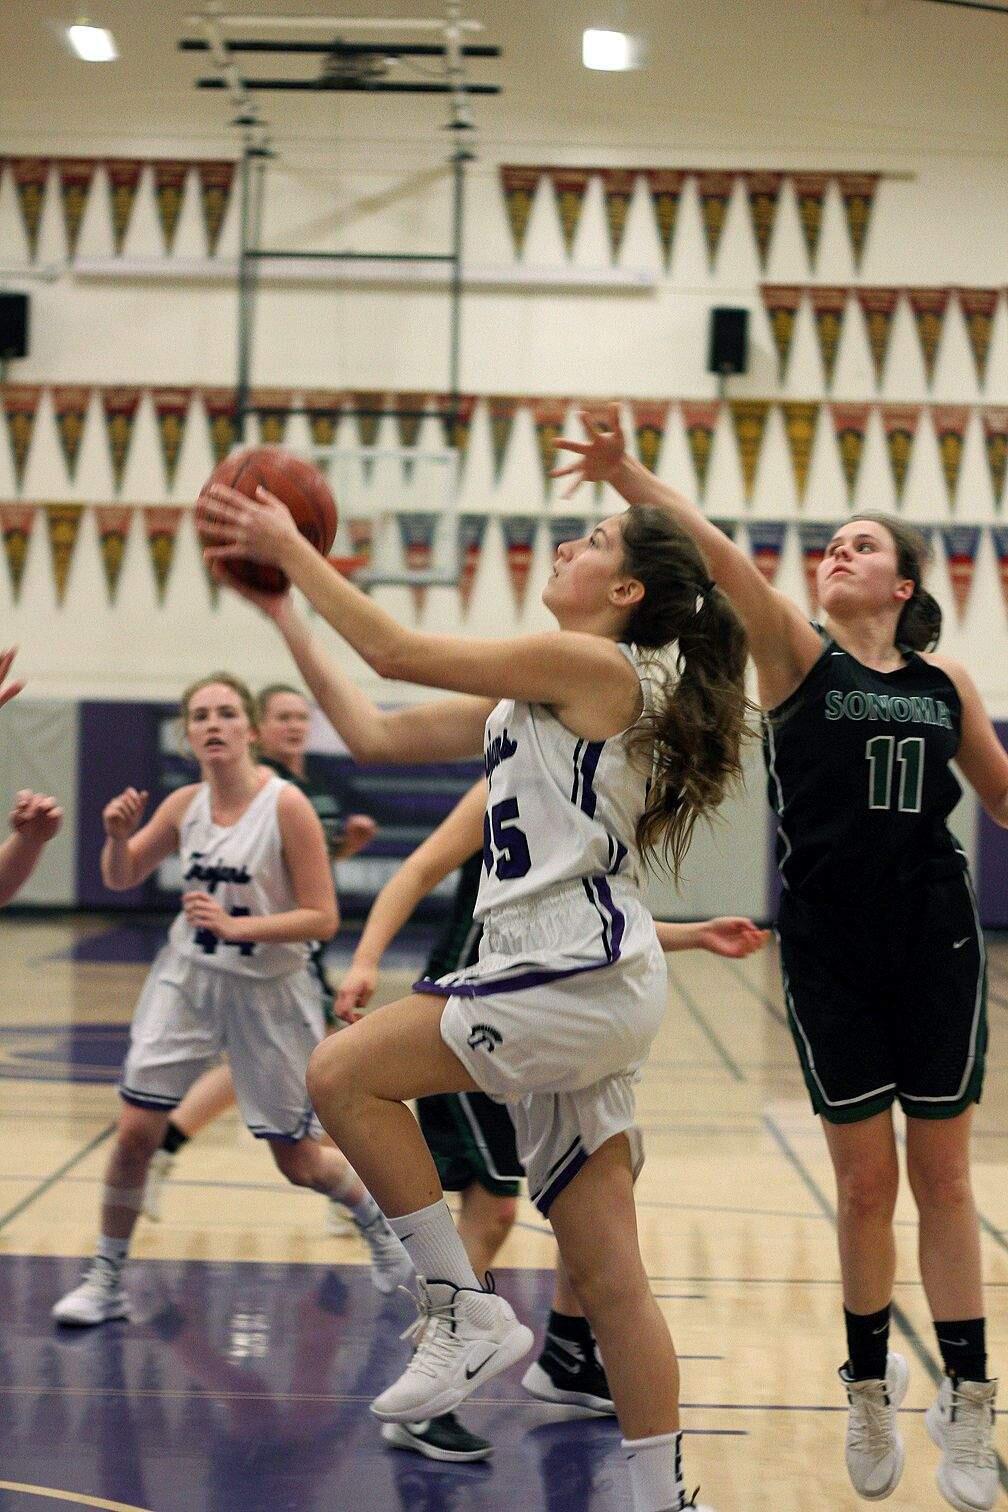 DWIGHT SUGIOKA/FOR THE ARGUS-COURIERPetaluma's Taylor Iacopi drives to the hoop for a basket in Petaluma's win over Sonoma Valley.